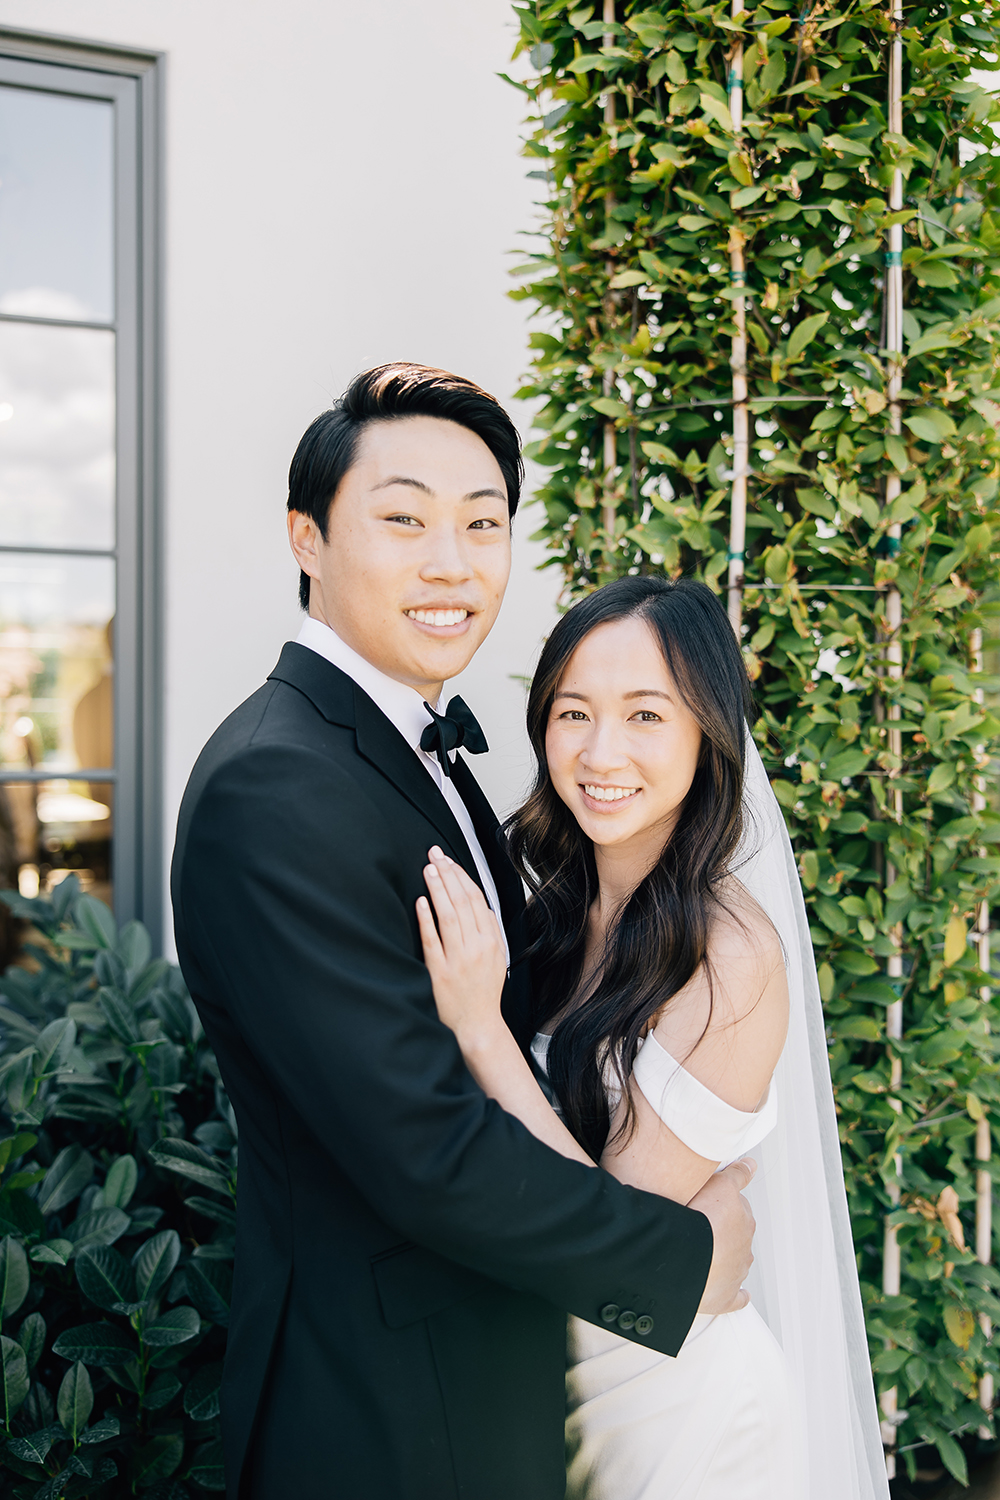 The bride and groom are happy and relaxed in a traditional tux and timeless off-the-shoulder bridal gown on their special day. Wedding planner stress-free hairstyle bowtie black and white veil portrait #missippiweddingphotographer #tennesseweddingphotographer #KaileeMatsumura #Bartletttennesse #southhavenmissippi
